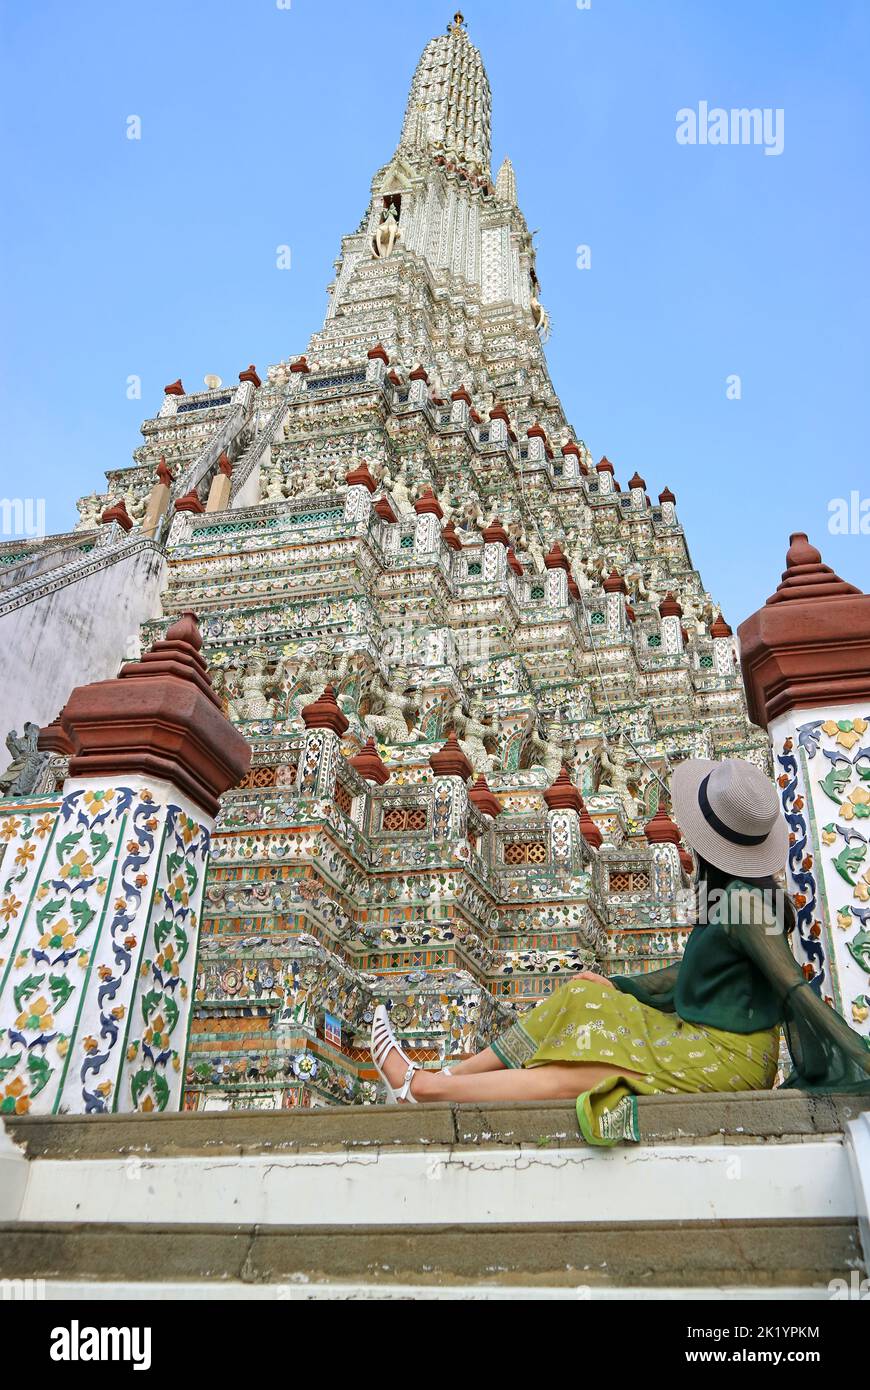 Female Visitor Being Impressed by Phraprang, the Central Spire of Wat Arun, One of the Iconic Landmarks of Bangkok, Thailand Stock Photo